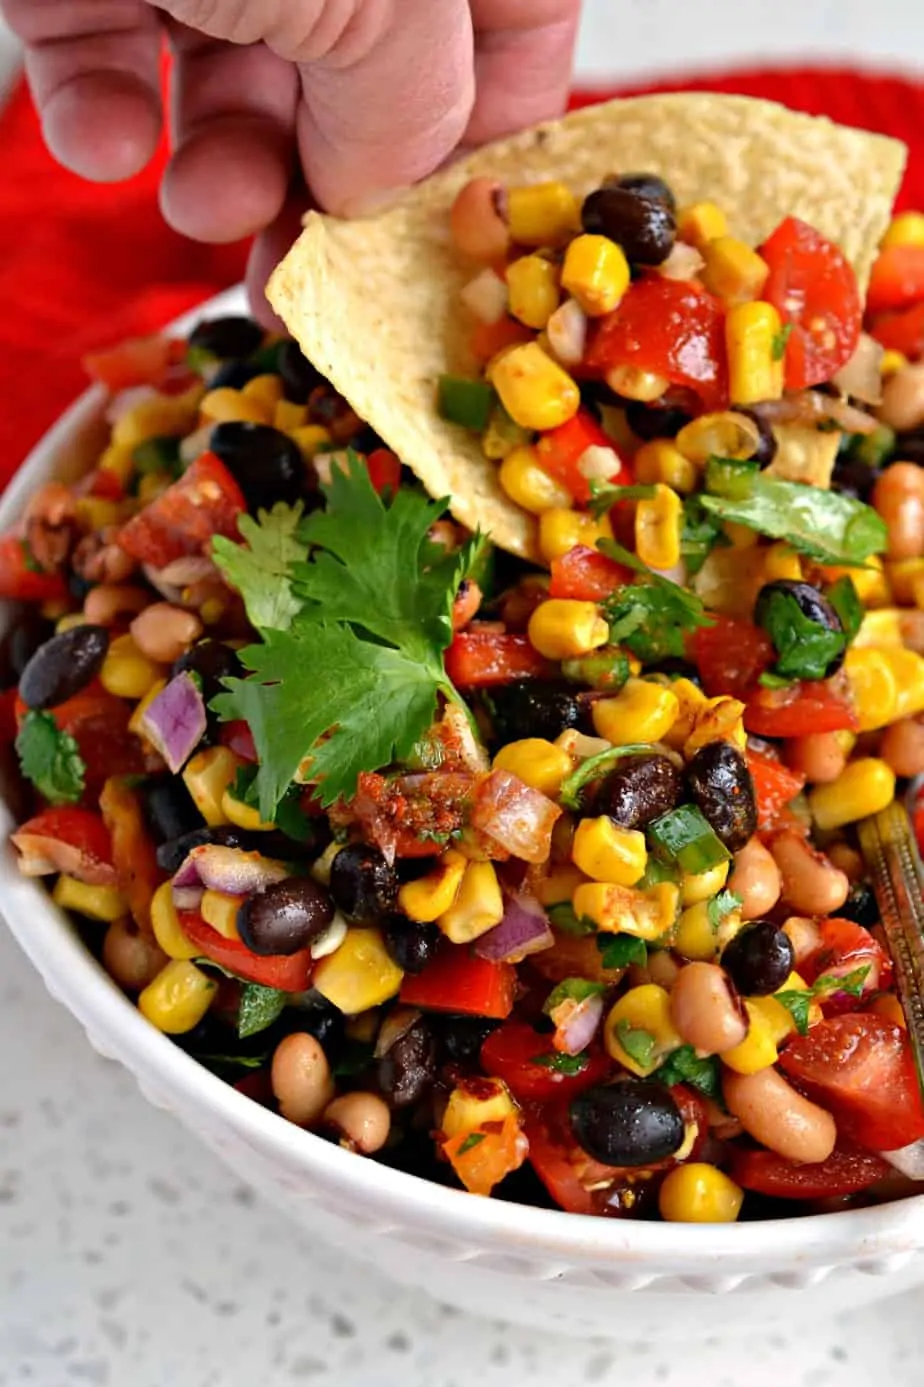 Spoon Cowboy Caviar over tacos, burritos, enchiladas, grilled chicken or fish, and omelettes.